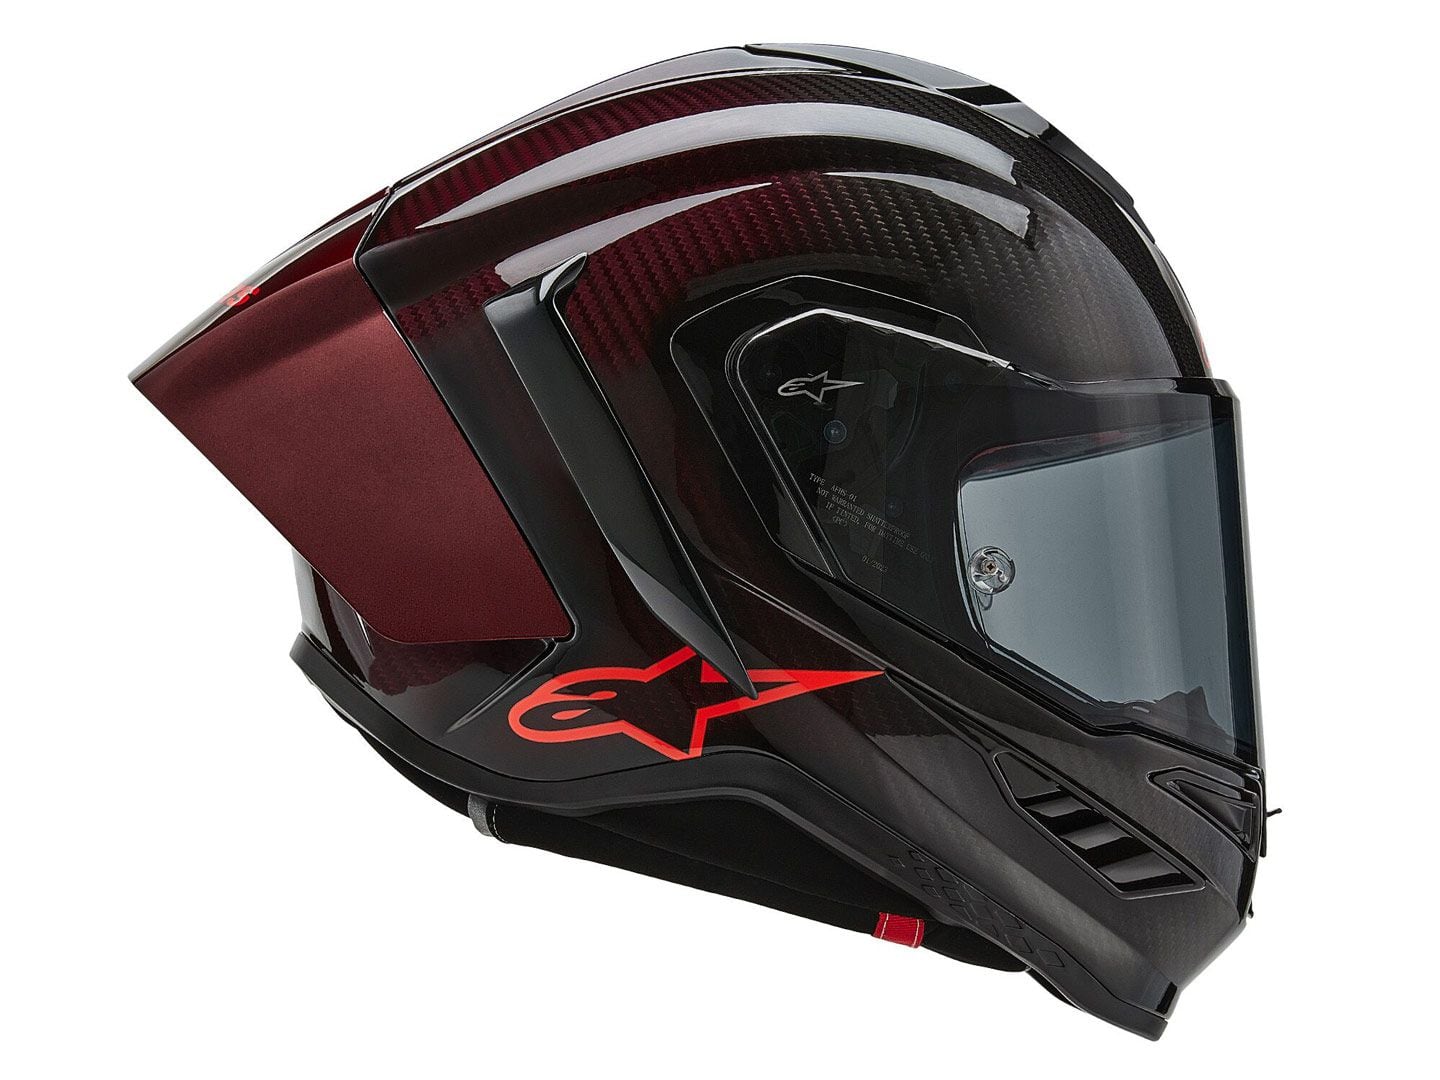 The R10’s shape is the result of countless hours spent in a full-scale wind tunnel. Notice the bottom edge of the chin bar, which has been sculpted to reduce the chance of collarbone injury. A softer EPP (Expanded Polypropylene) liner extends beyond the shell and is covered by a rubber compound.